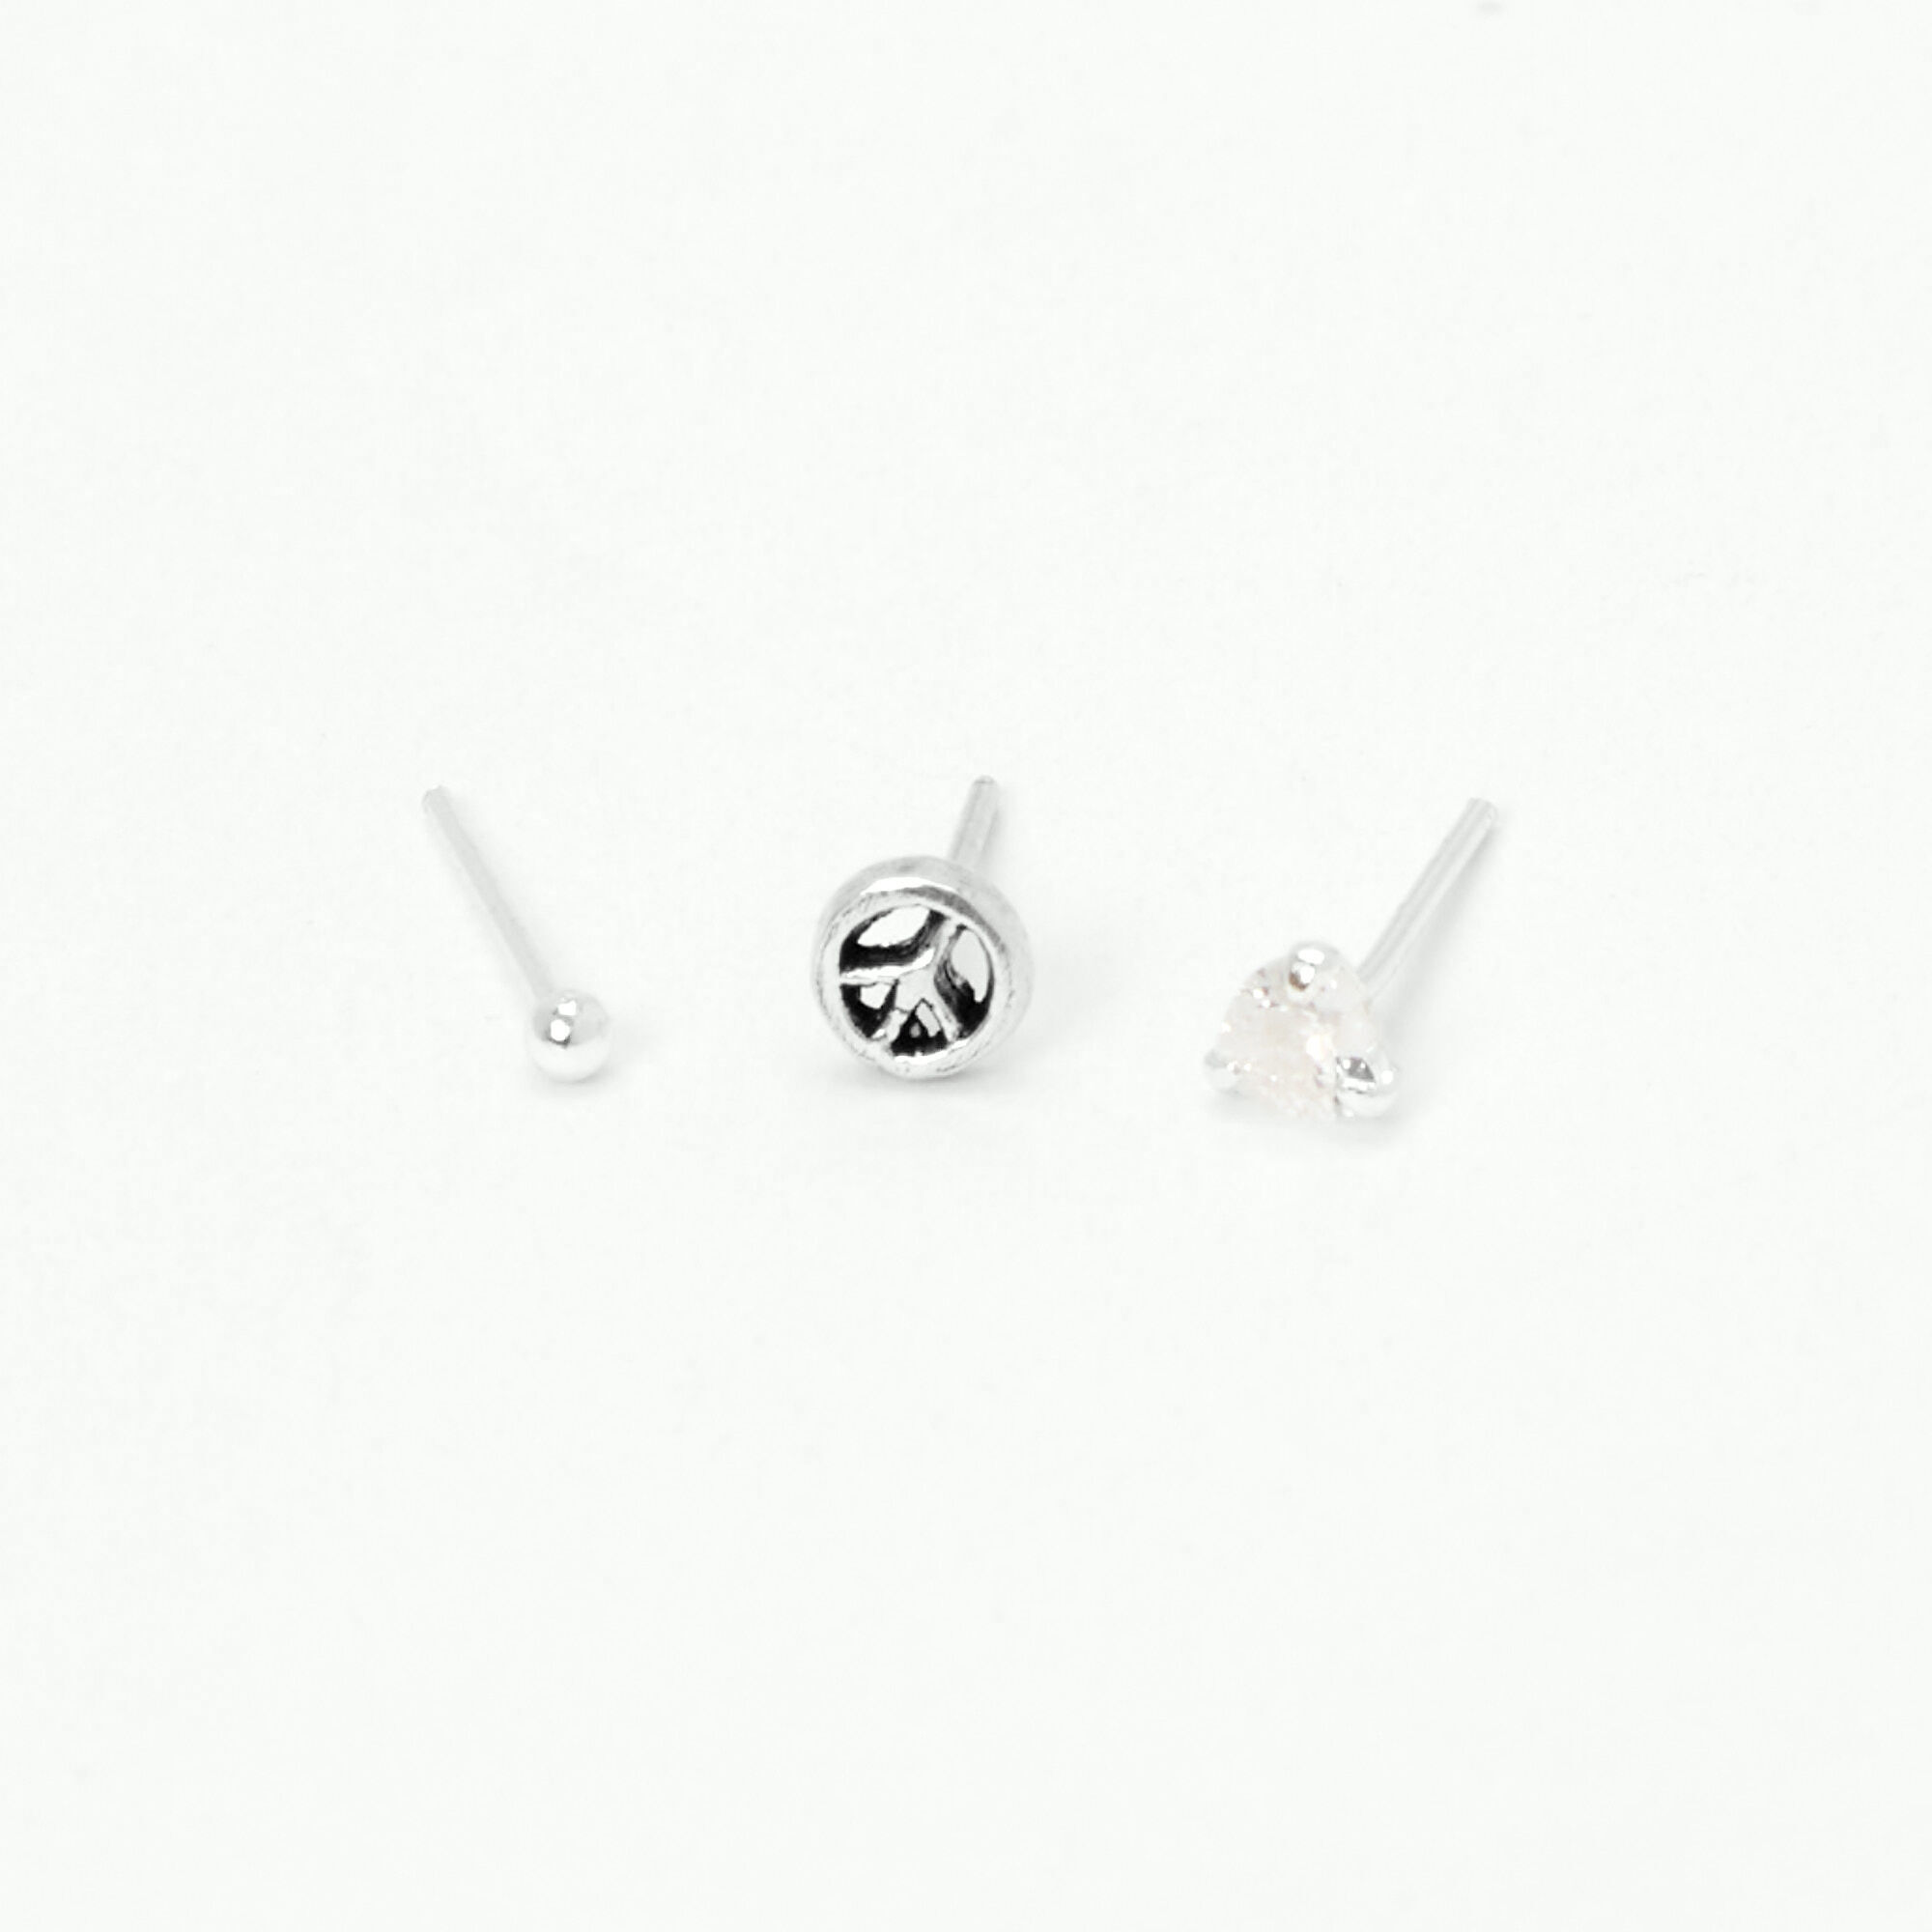 View Claires 20G Peace Sign Nose Studs 3 Pack Silver information